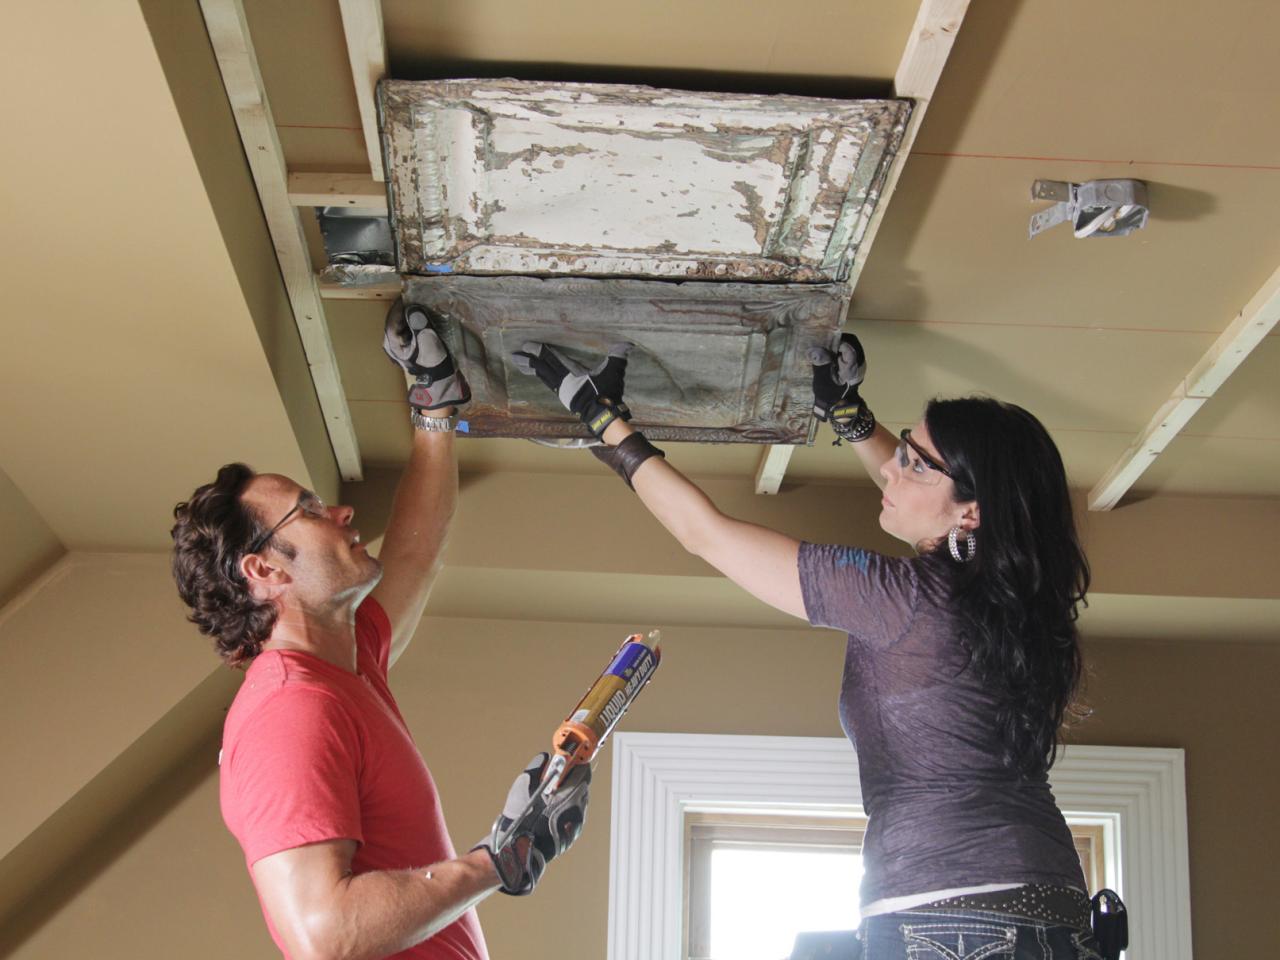 How To Install A Stamped Tin Ceiling Tos Diy - How To Install Tin Ceiling Tiles In Basement